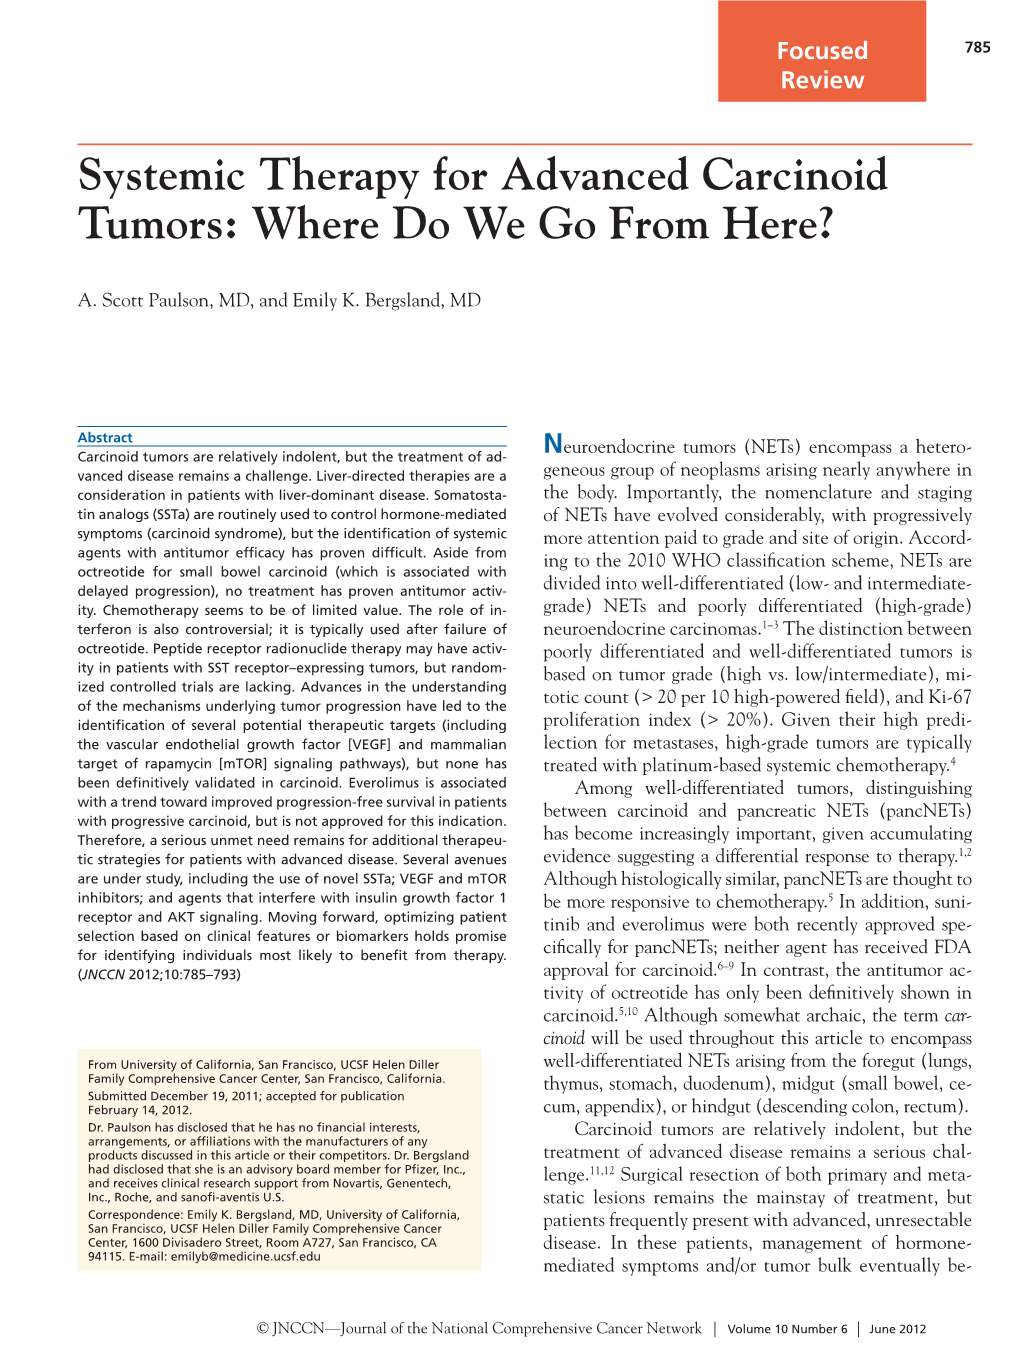 Systemic Therapy for Advanced Carcinoid Tumors: Where Do We Go from Here?